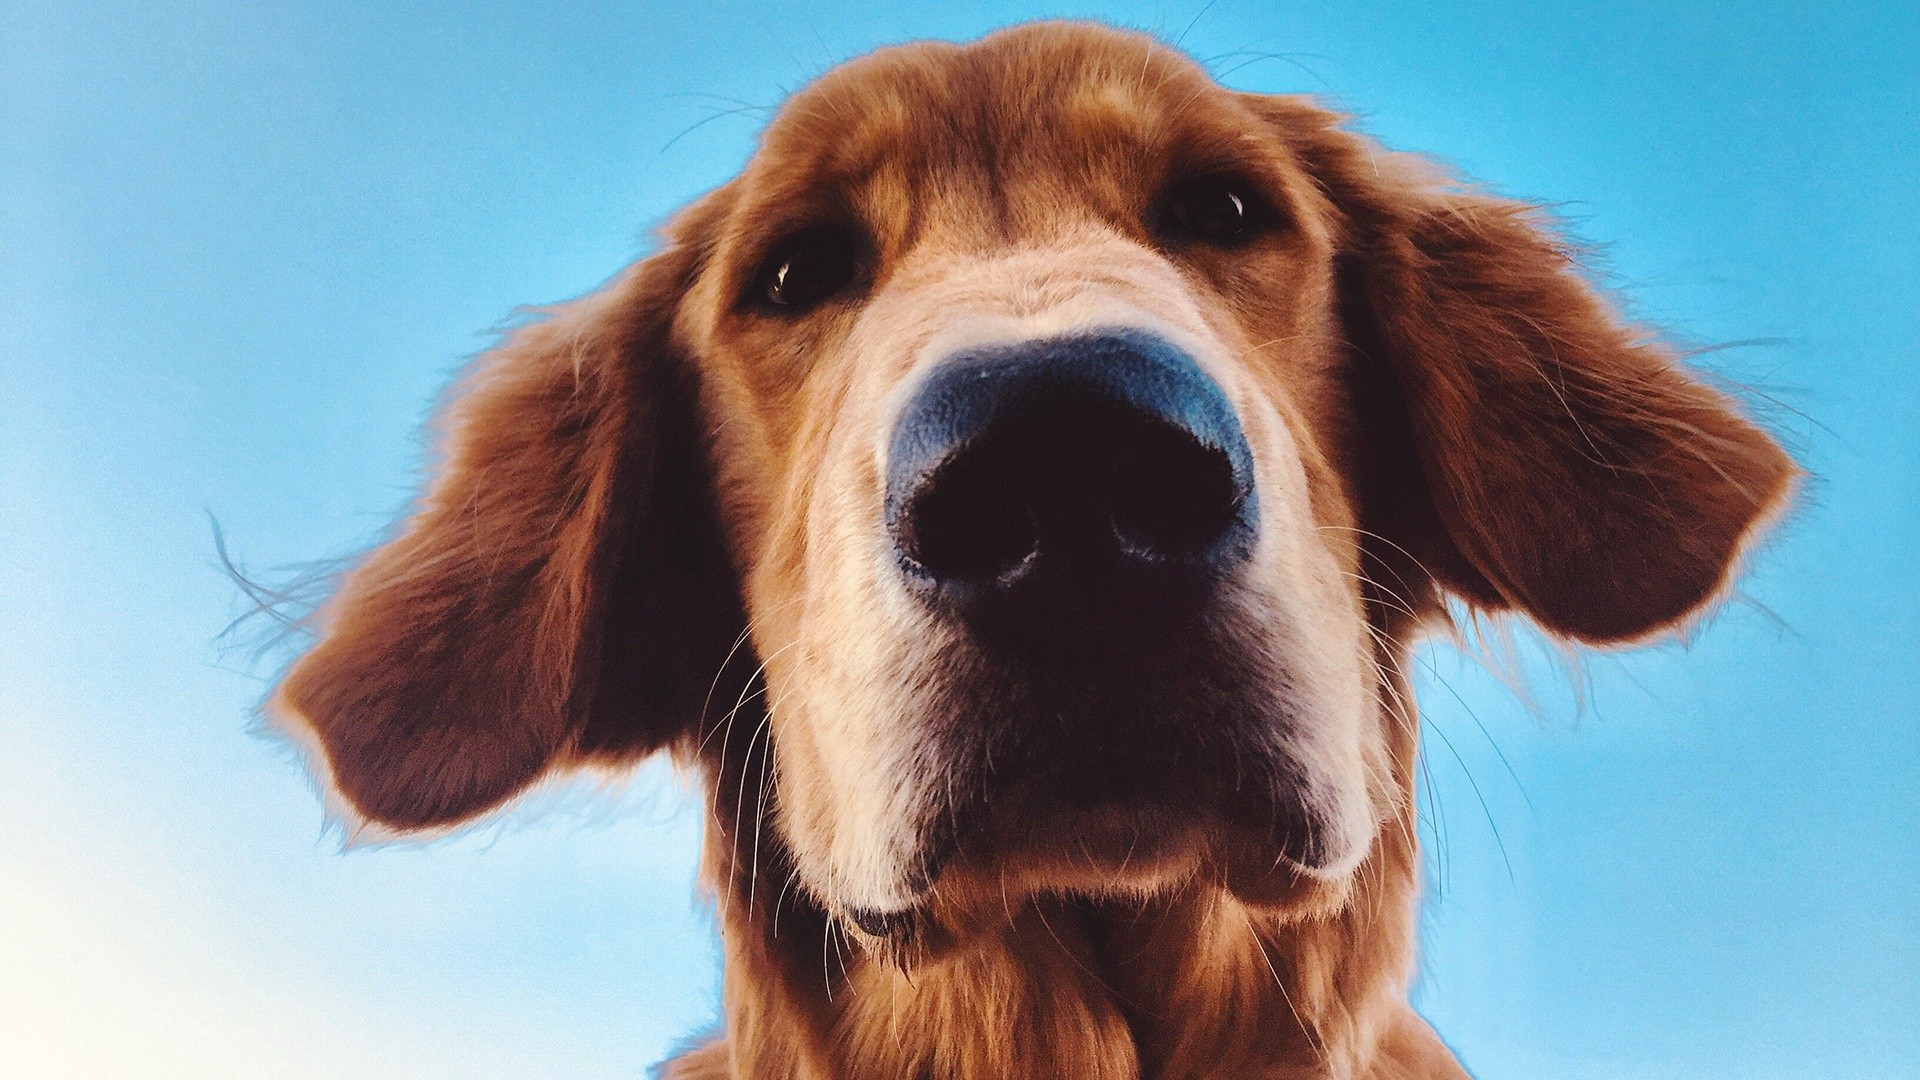 Dogs can 'see' with their noses, study suggests